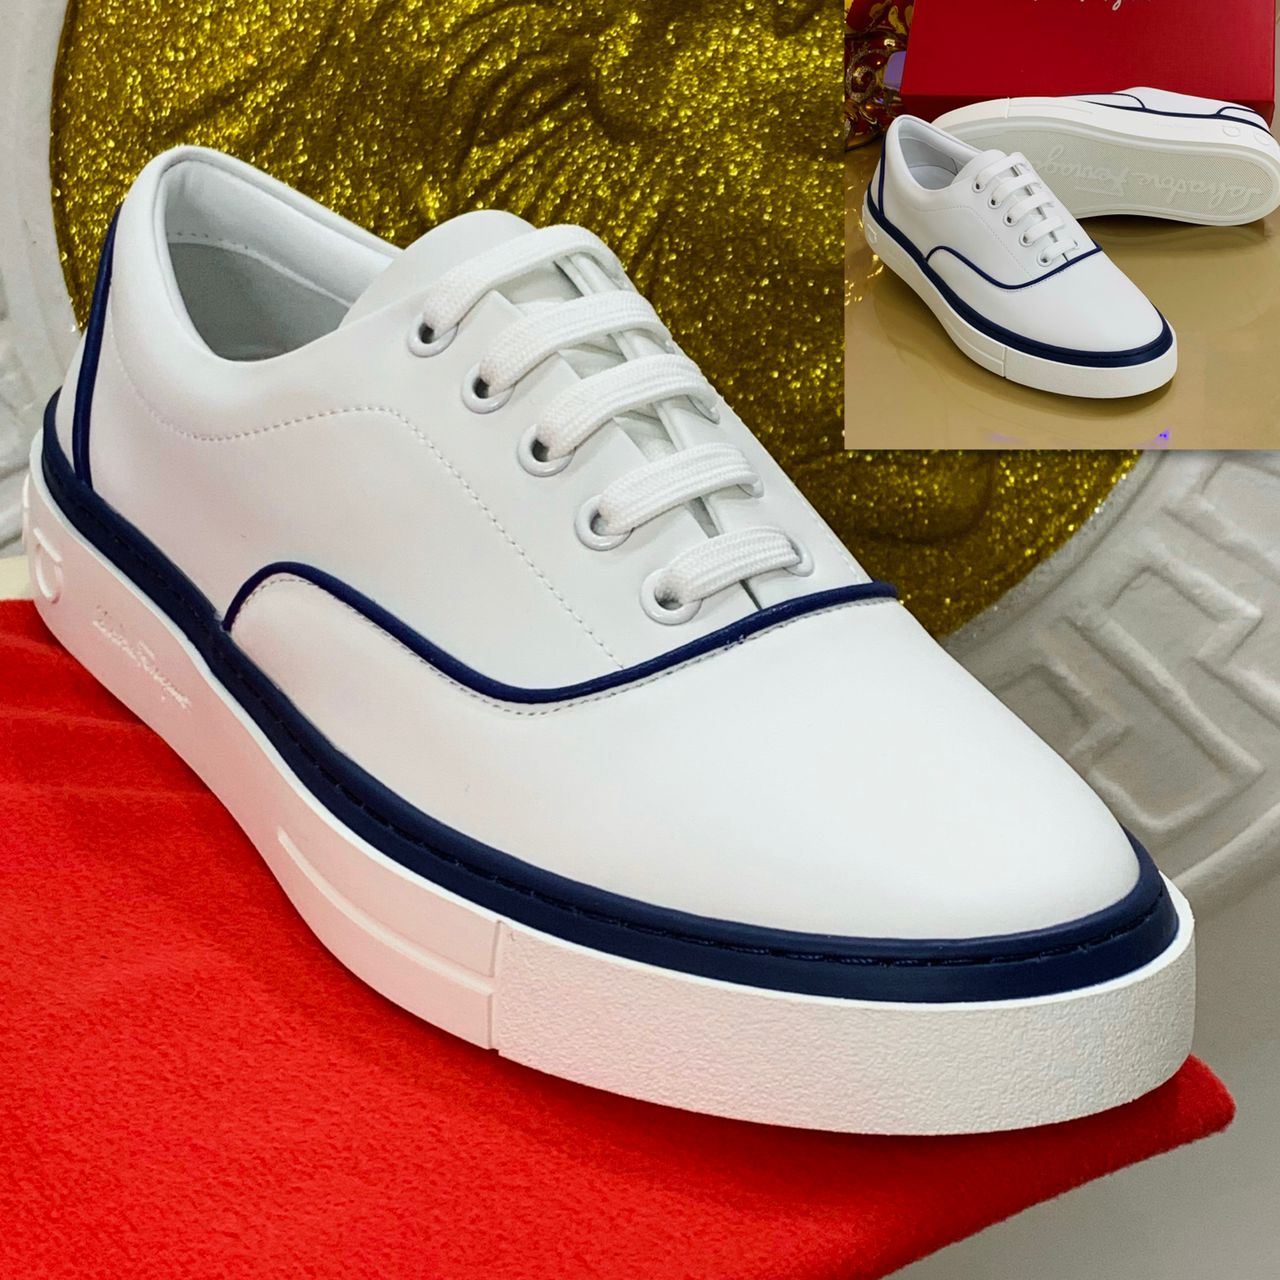 QUALITY STREAK DESIGNED WHITE HIGH TOP SNEAKERS for CartRollers Marketplace For Shopping Online, Fashion, Electronics, Phones, Computers and Buy Men Shoe, Home Appliances, Kitchen-wares, Groceries Accessories, ankara, Aso-Ebi, Beads, Boys Casual Wears, Children Children's Wears ,Corporate Shoes, Cosmetics Dress ,Dresses Fashion, Girls' Dresses ,Girls' Wears, Hair Care ,Jewelries ,Jewelry Kids, Kids' Fashion Ladies ,Wears Lapel Pins, Loafers Shoe Men ,Men's Caftan, Men's Casual Shoes, Men's Fashion, Men's Shoes, Men's Wears, Moccasin Shoe, Natural Hair, In Lagos Nigeria